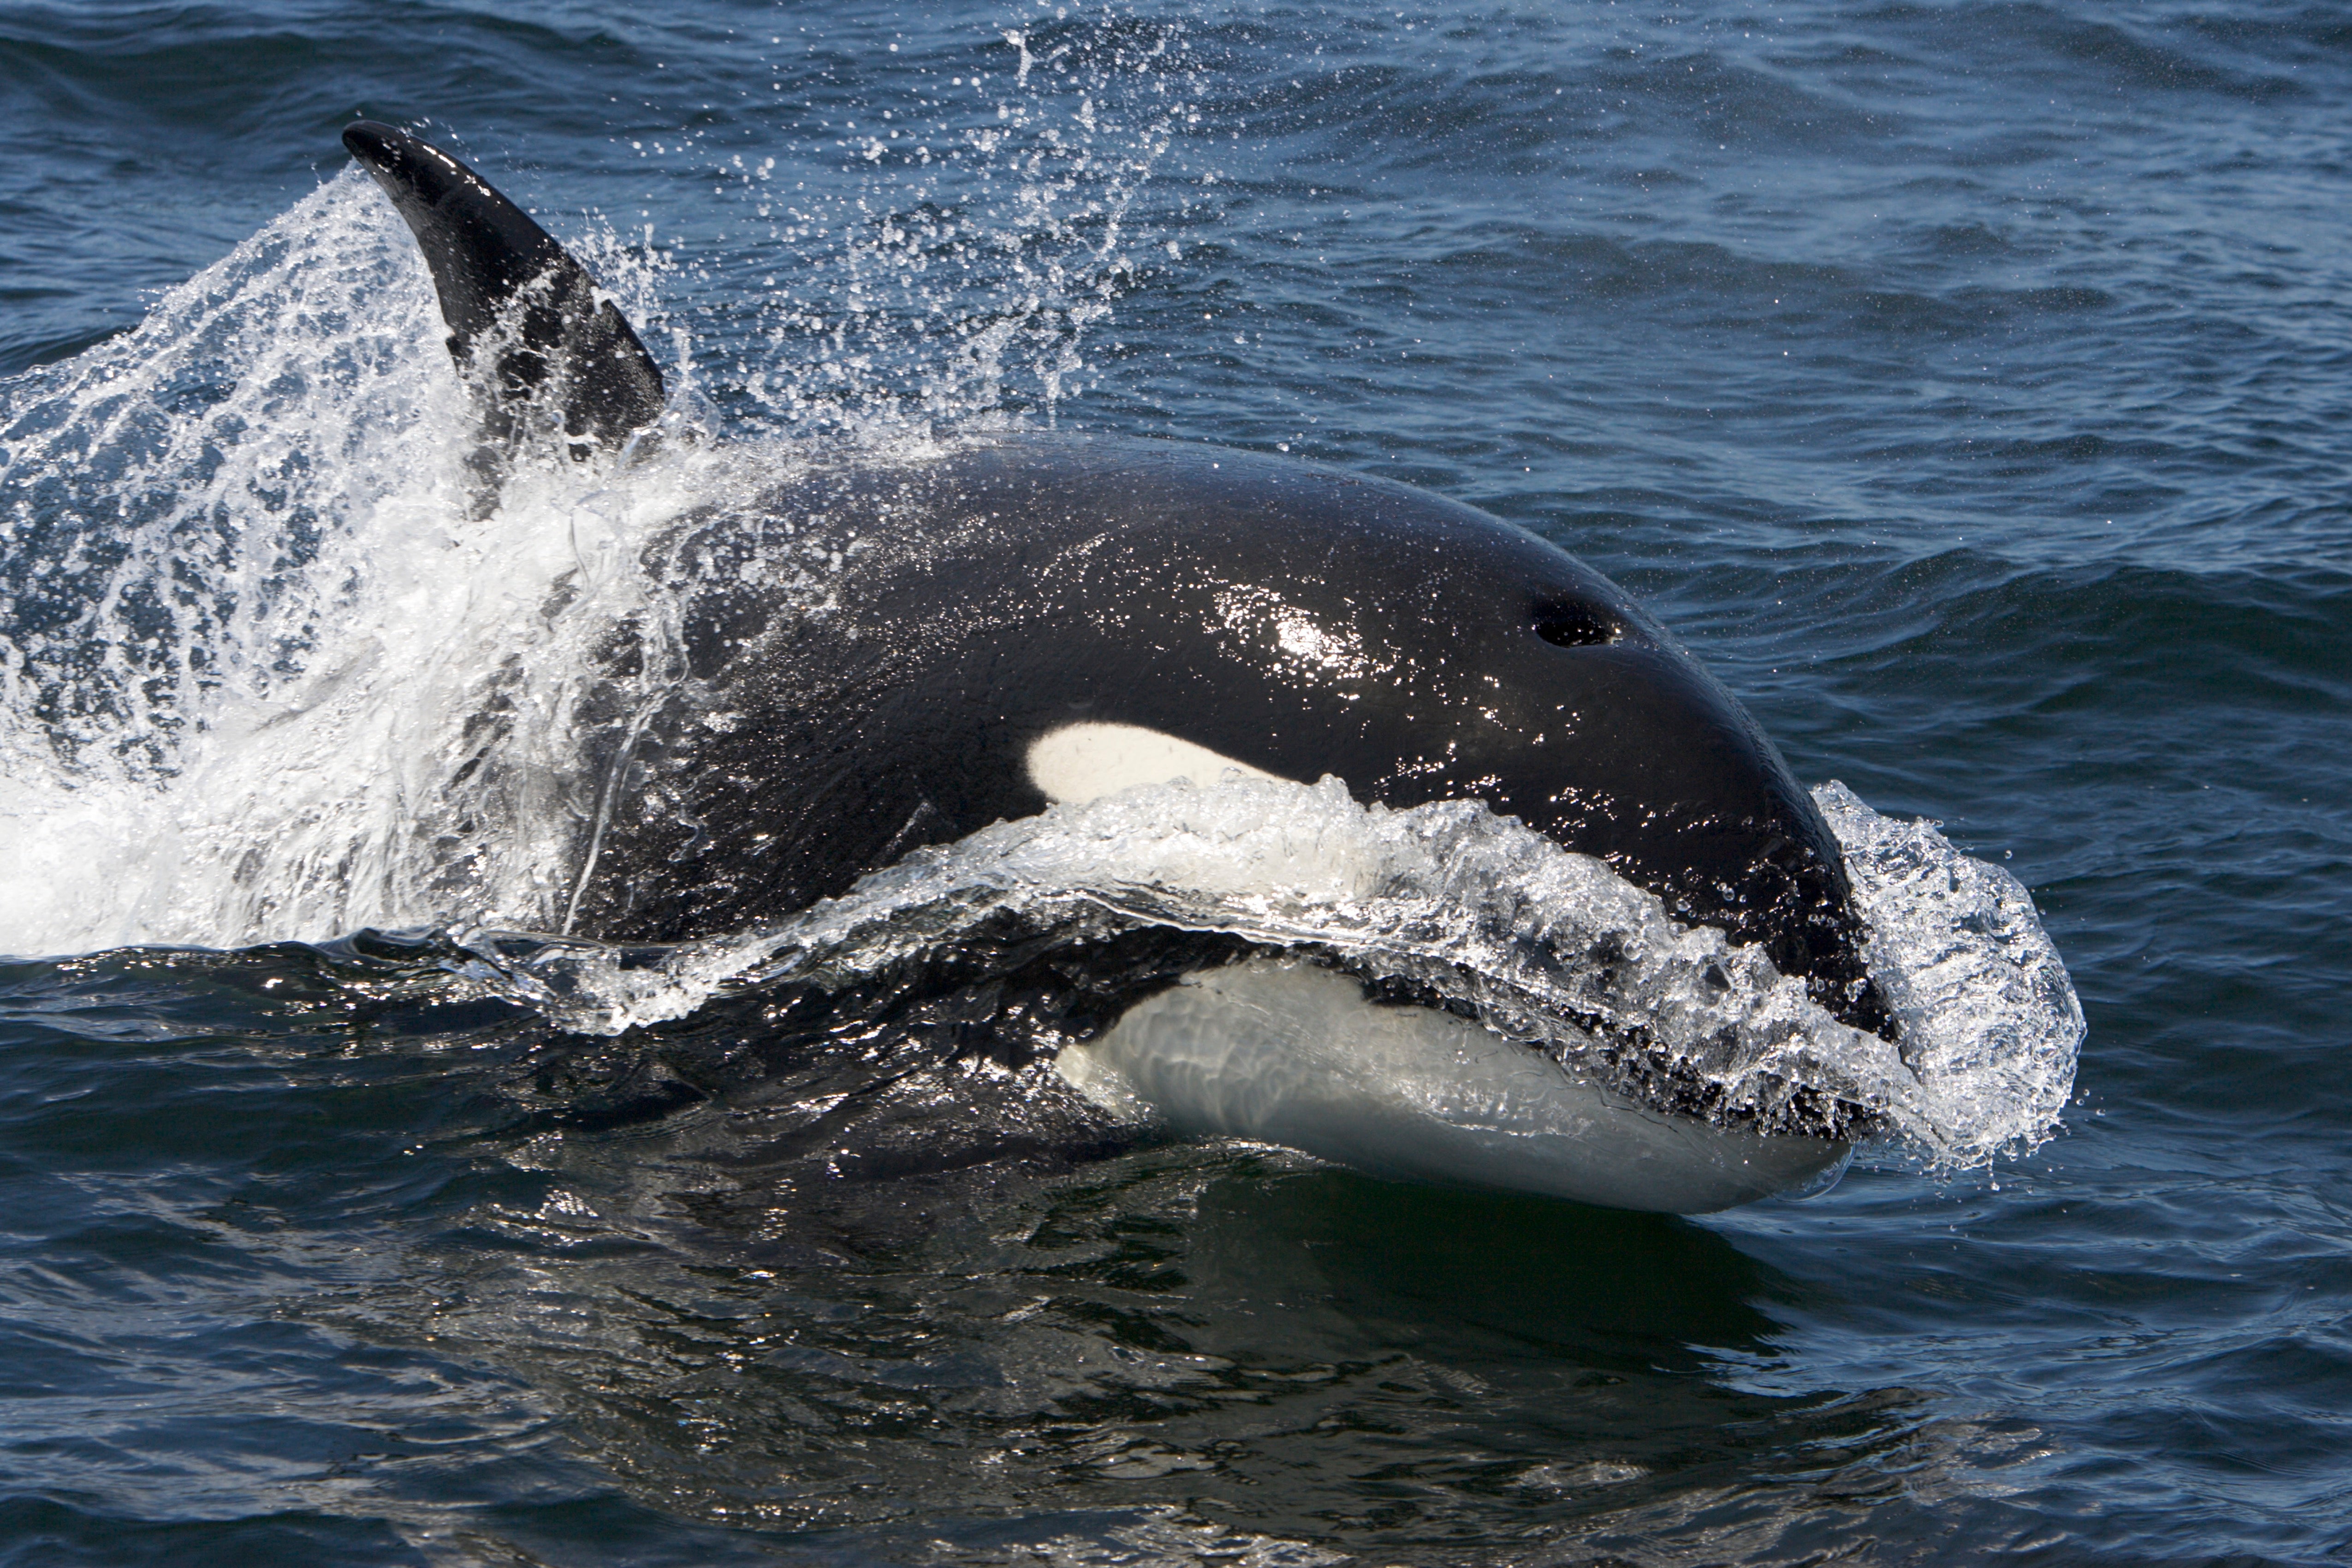 As Arctic Sea Ice Melts, Killer Whales Are Moving In - Scientific American